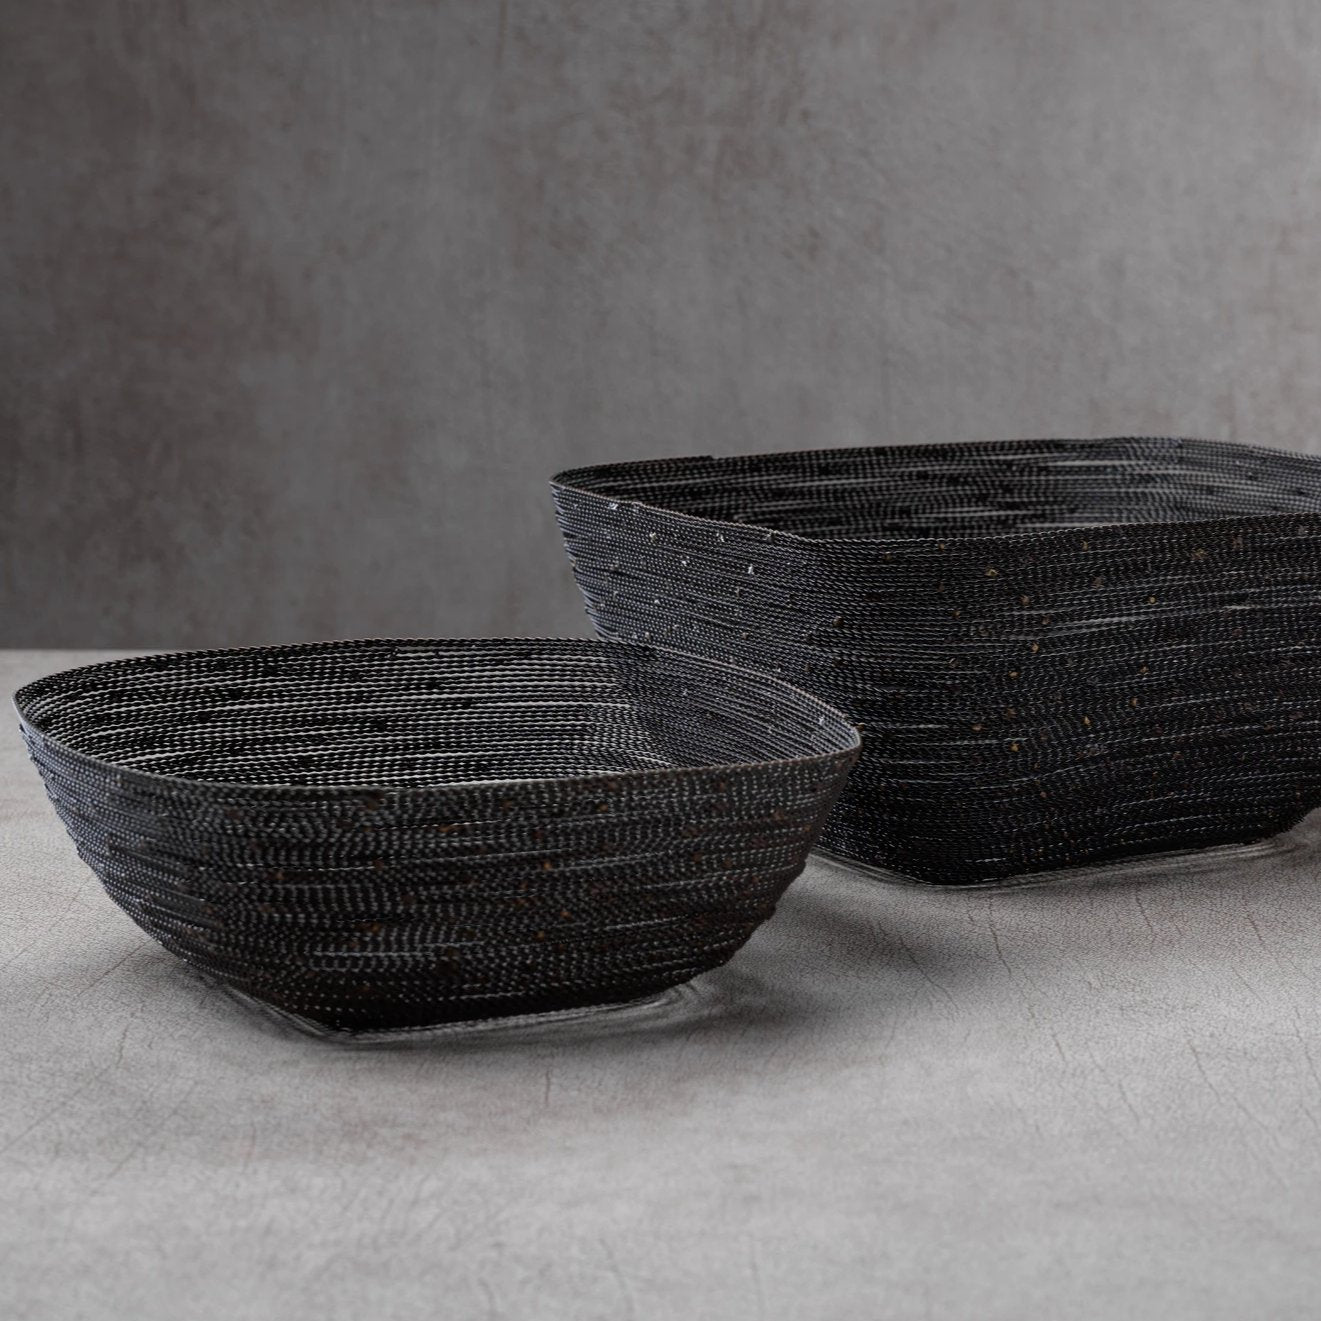 Dakar Twisted Wire Square Bowl - CARLYLE AVENUE